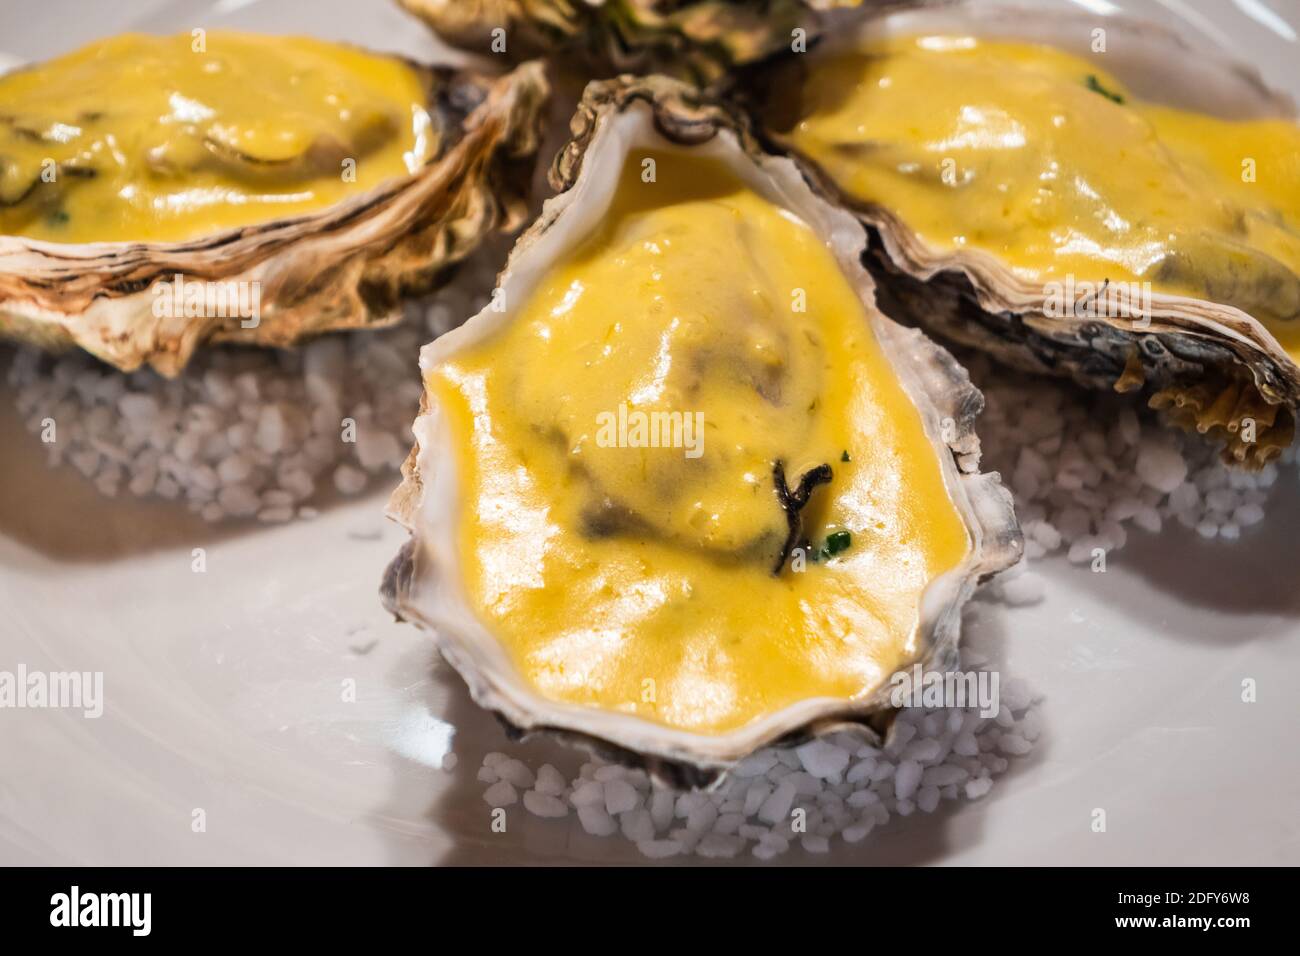 Oysters Rockefeller Broiled in Half Shall on a White Plate, a Typical Dish of New Orleans Cuisine Stock Photo